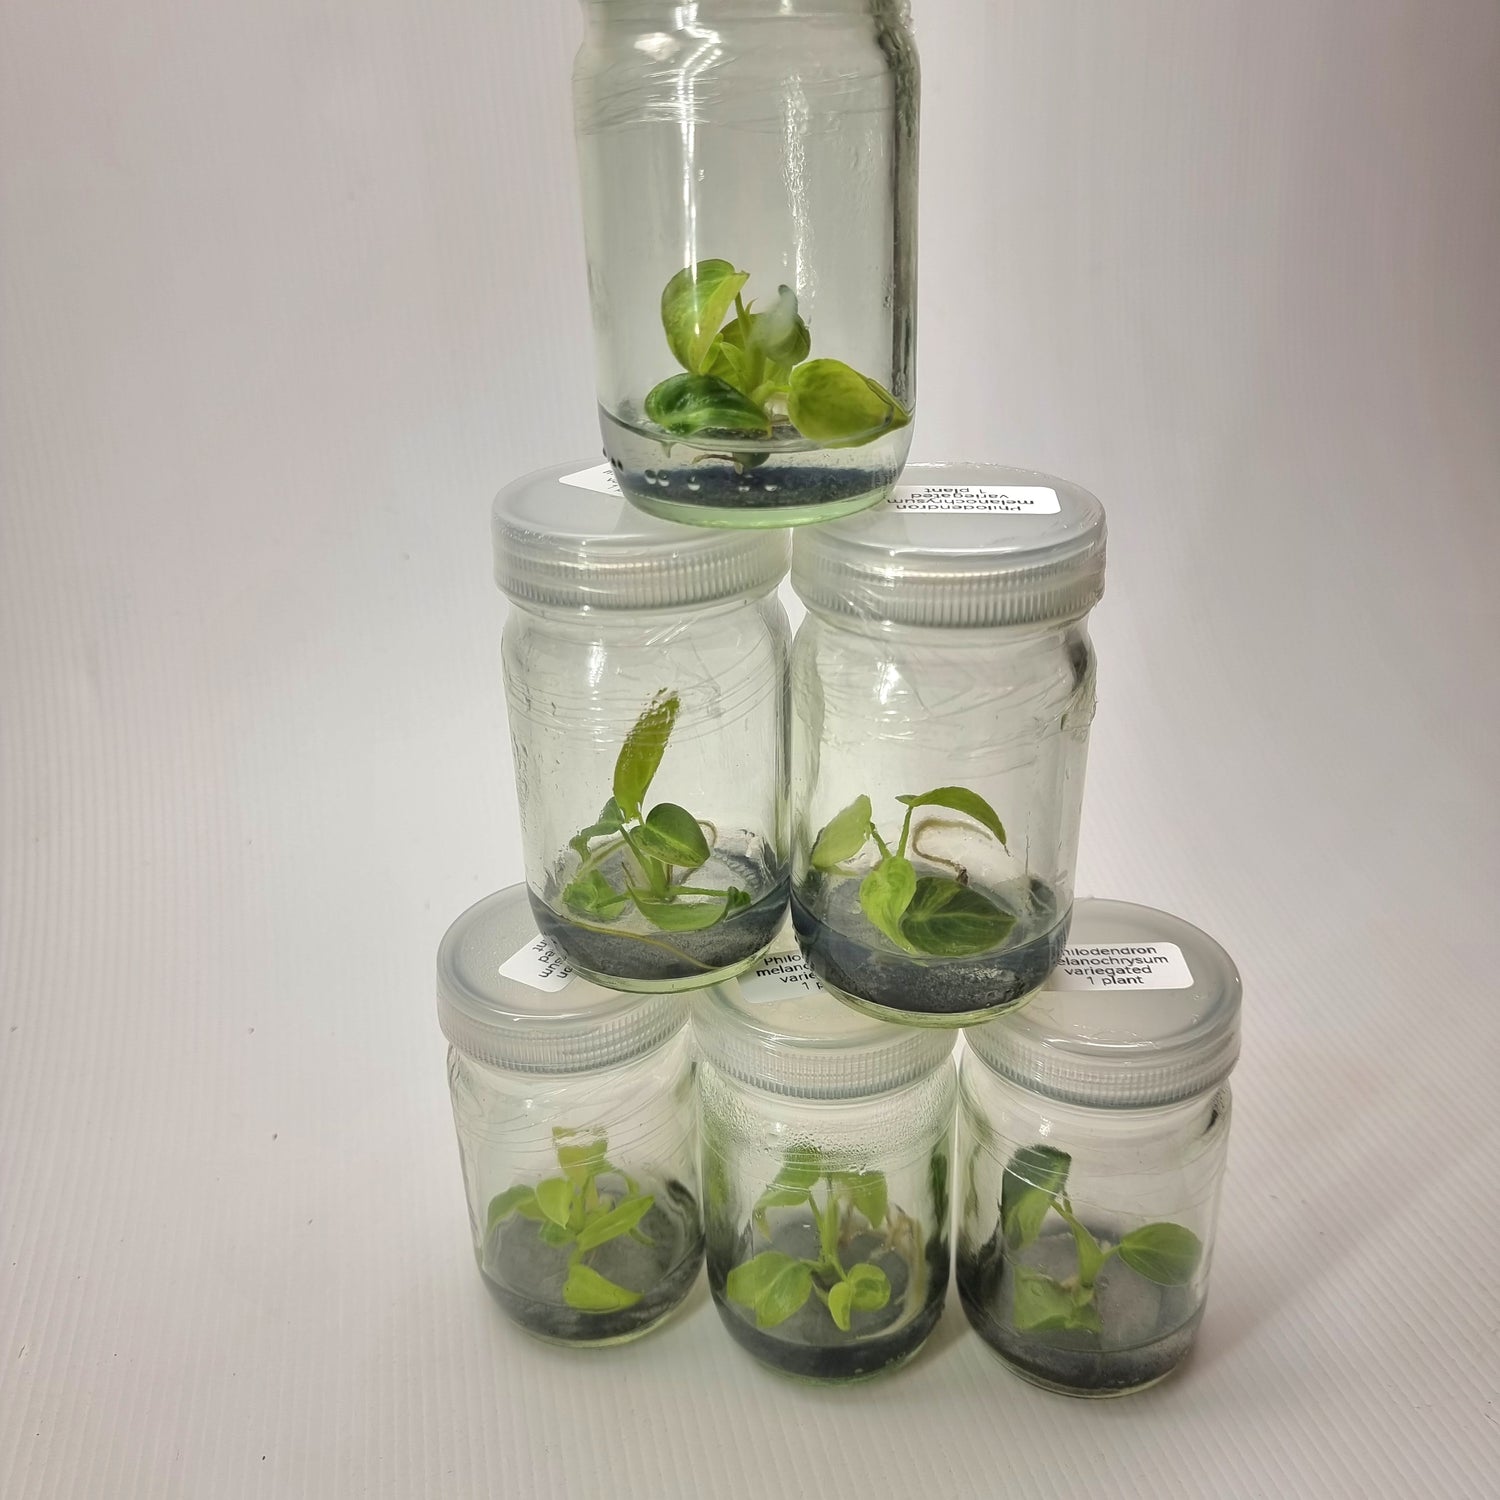 Philodendron melanochrysum variegated (1plant/flask) - Tissue culture kit for sale in Perth Australia